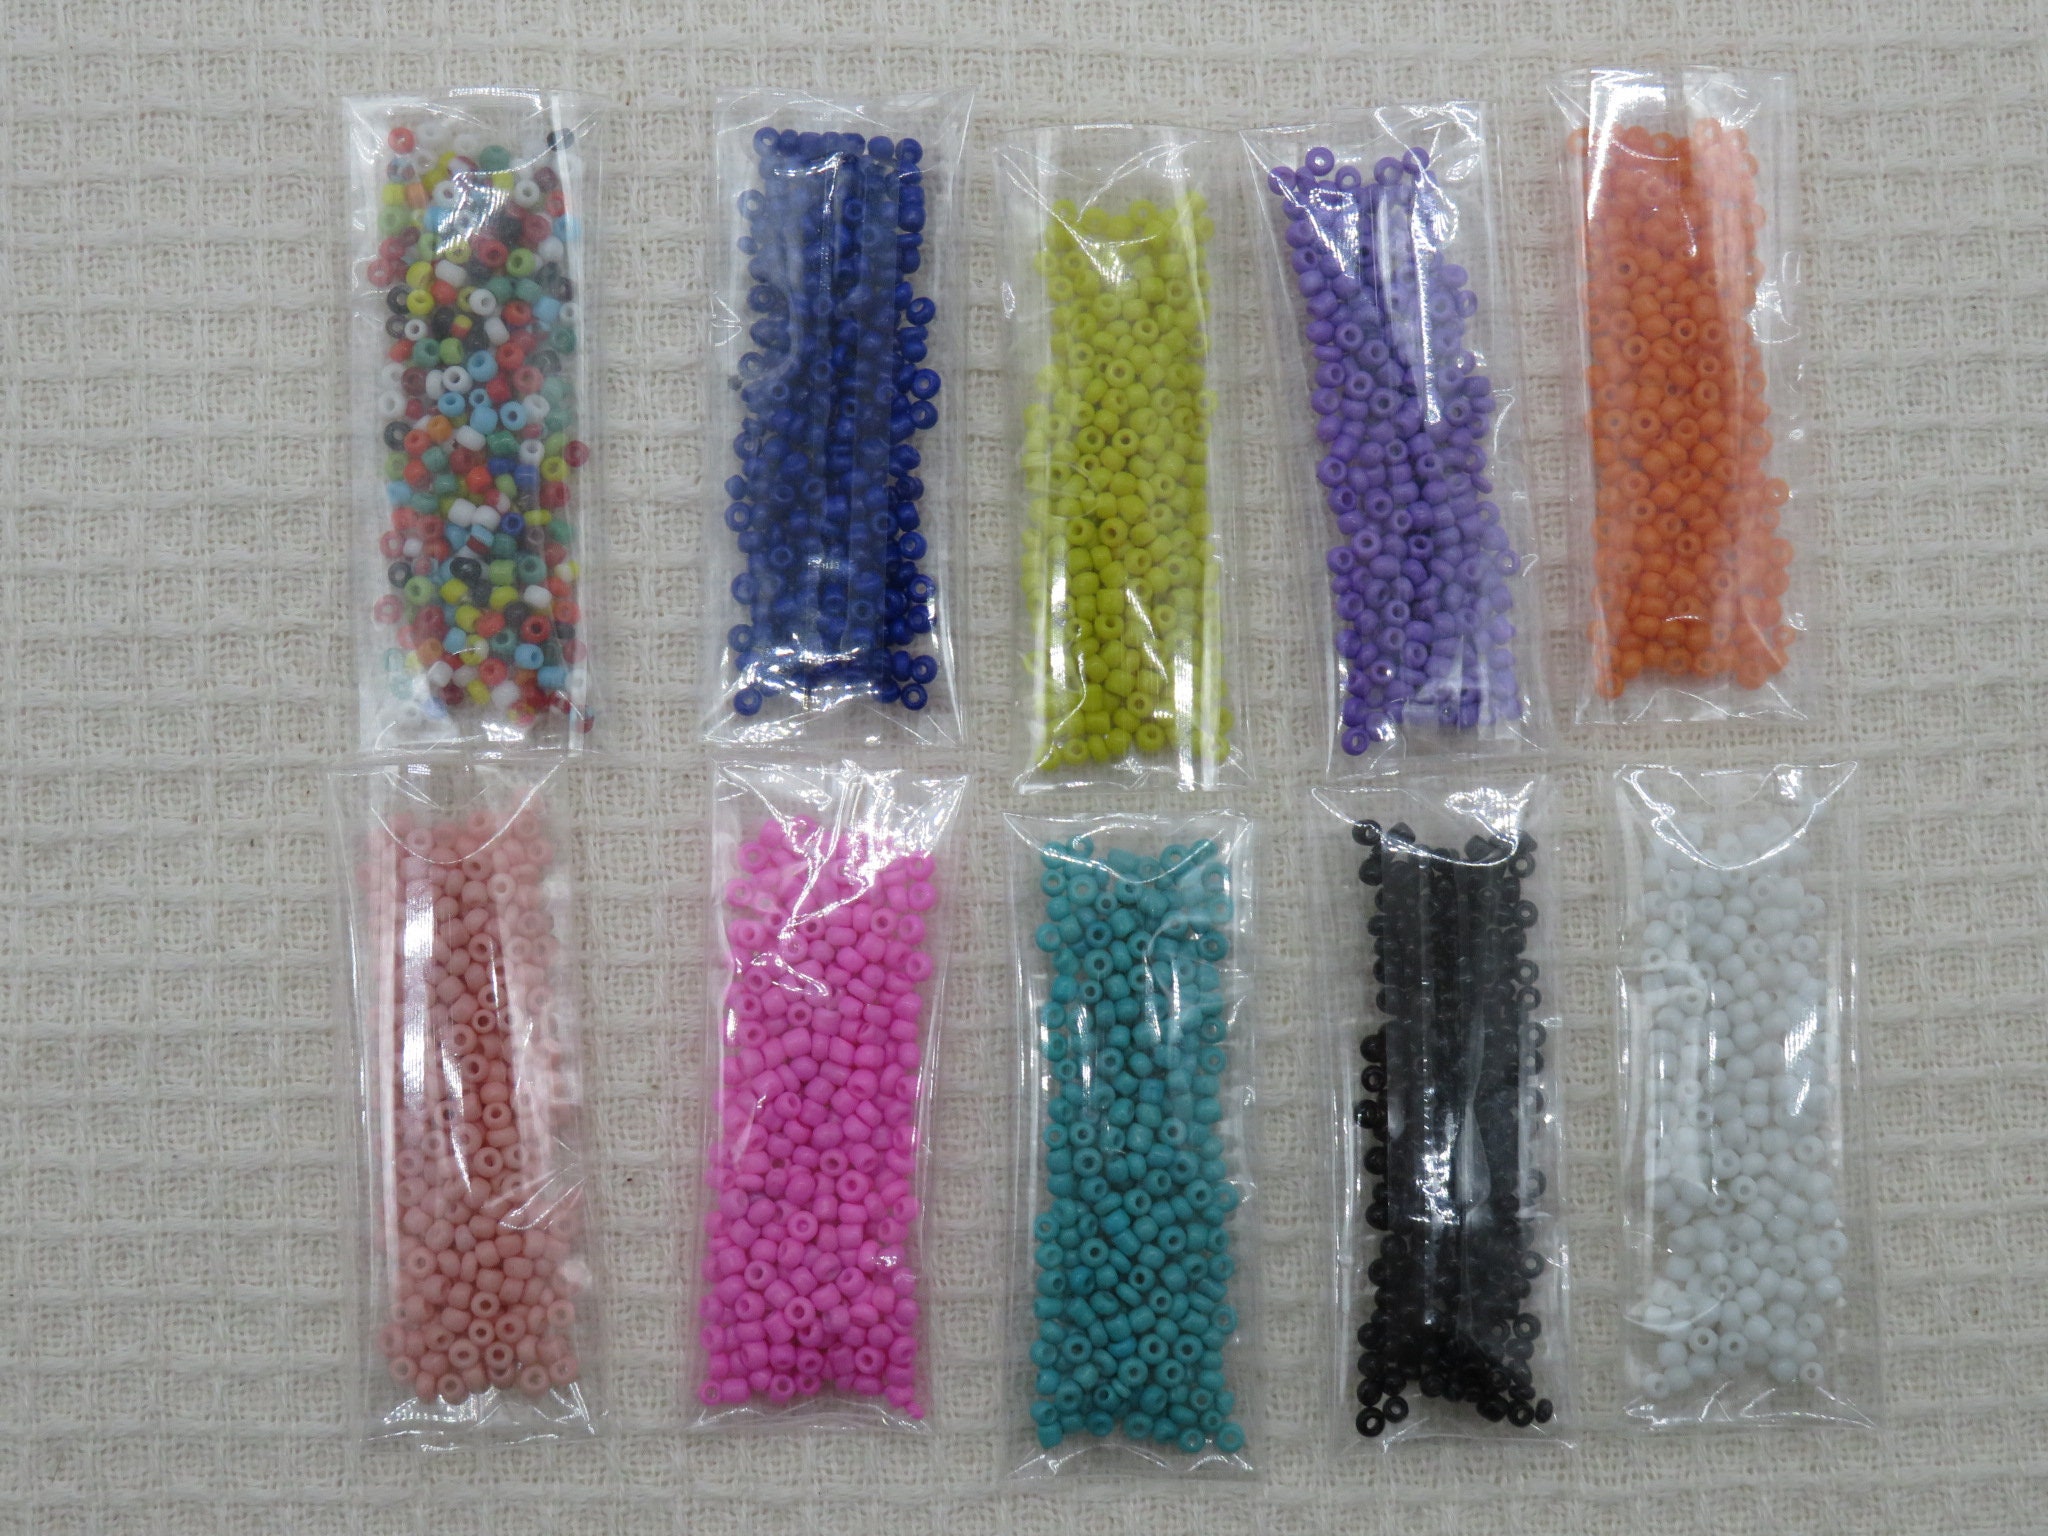 10g Mixed Colors Glass Seed 800 Pcs Small Beads, Beading Supplies G411